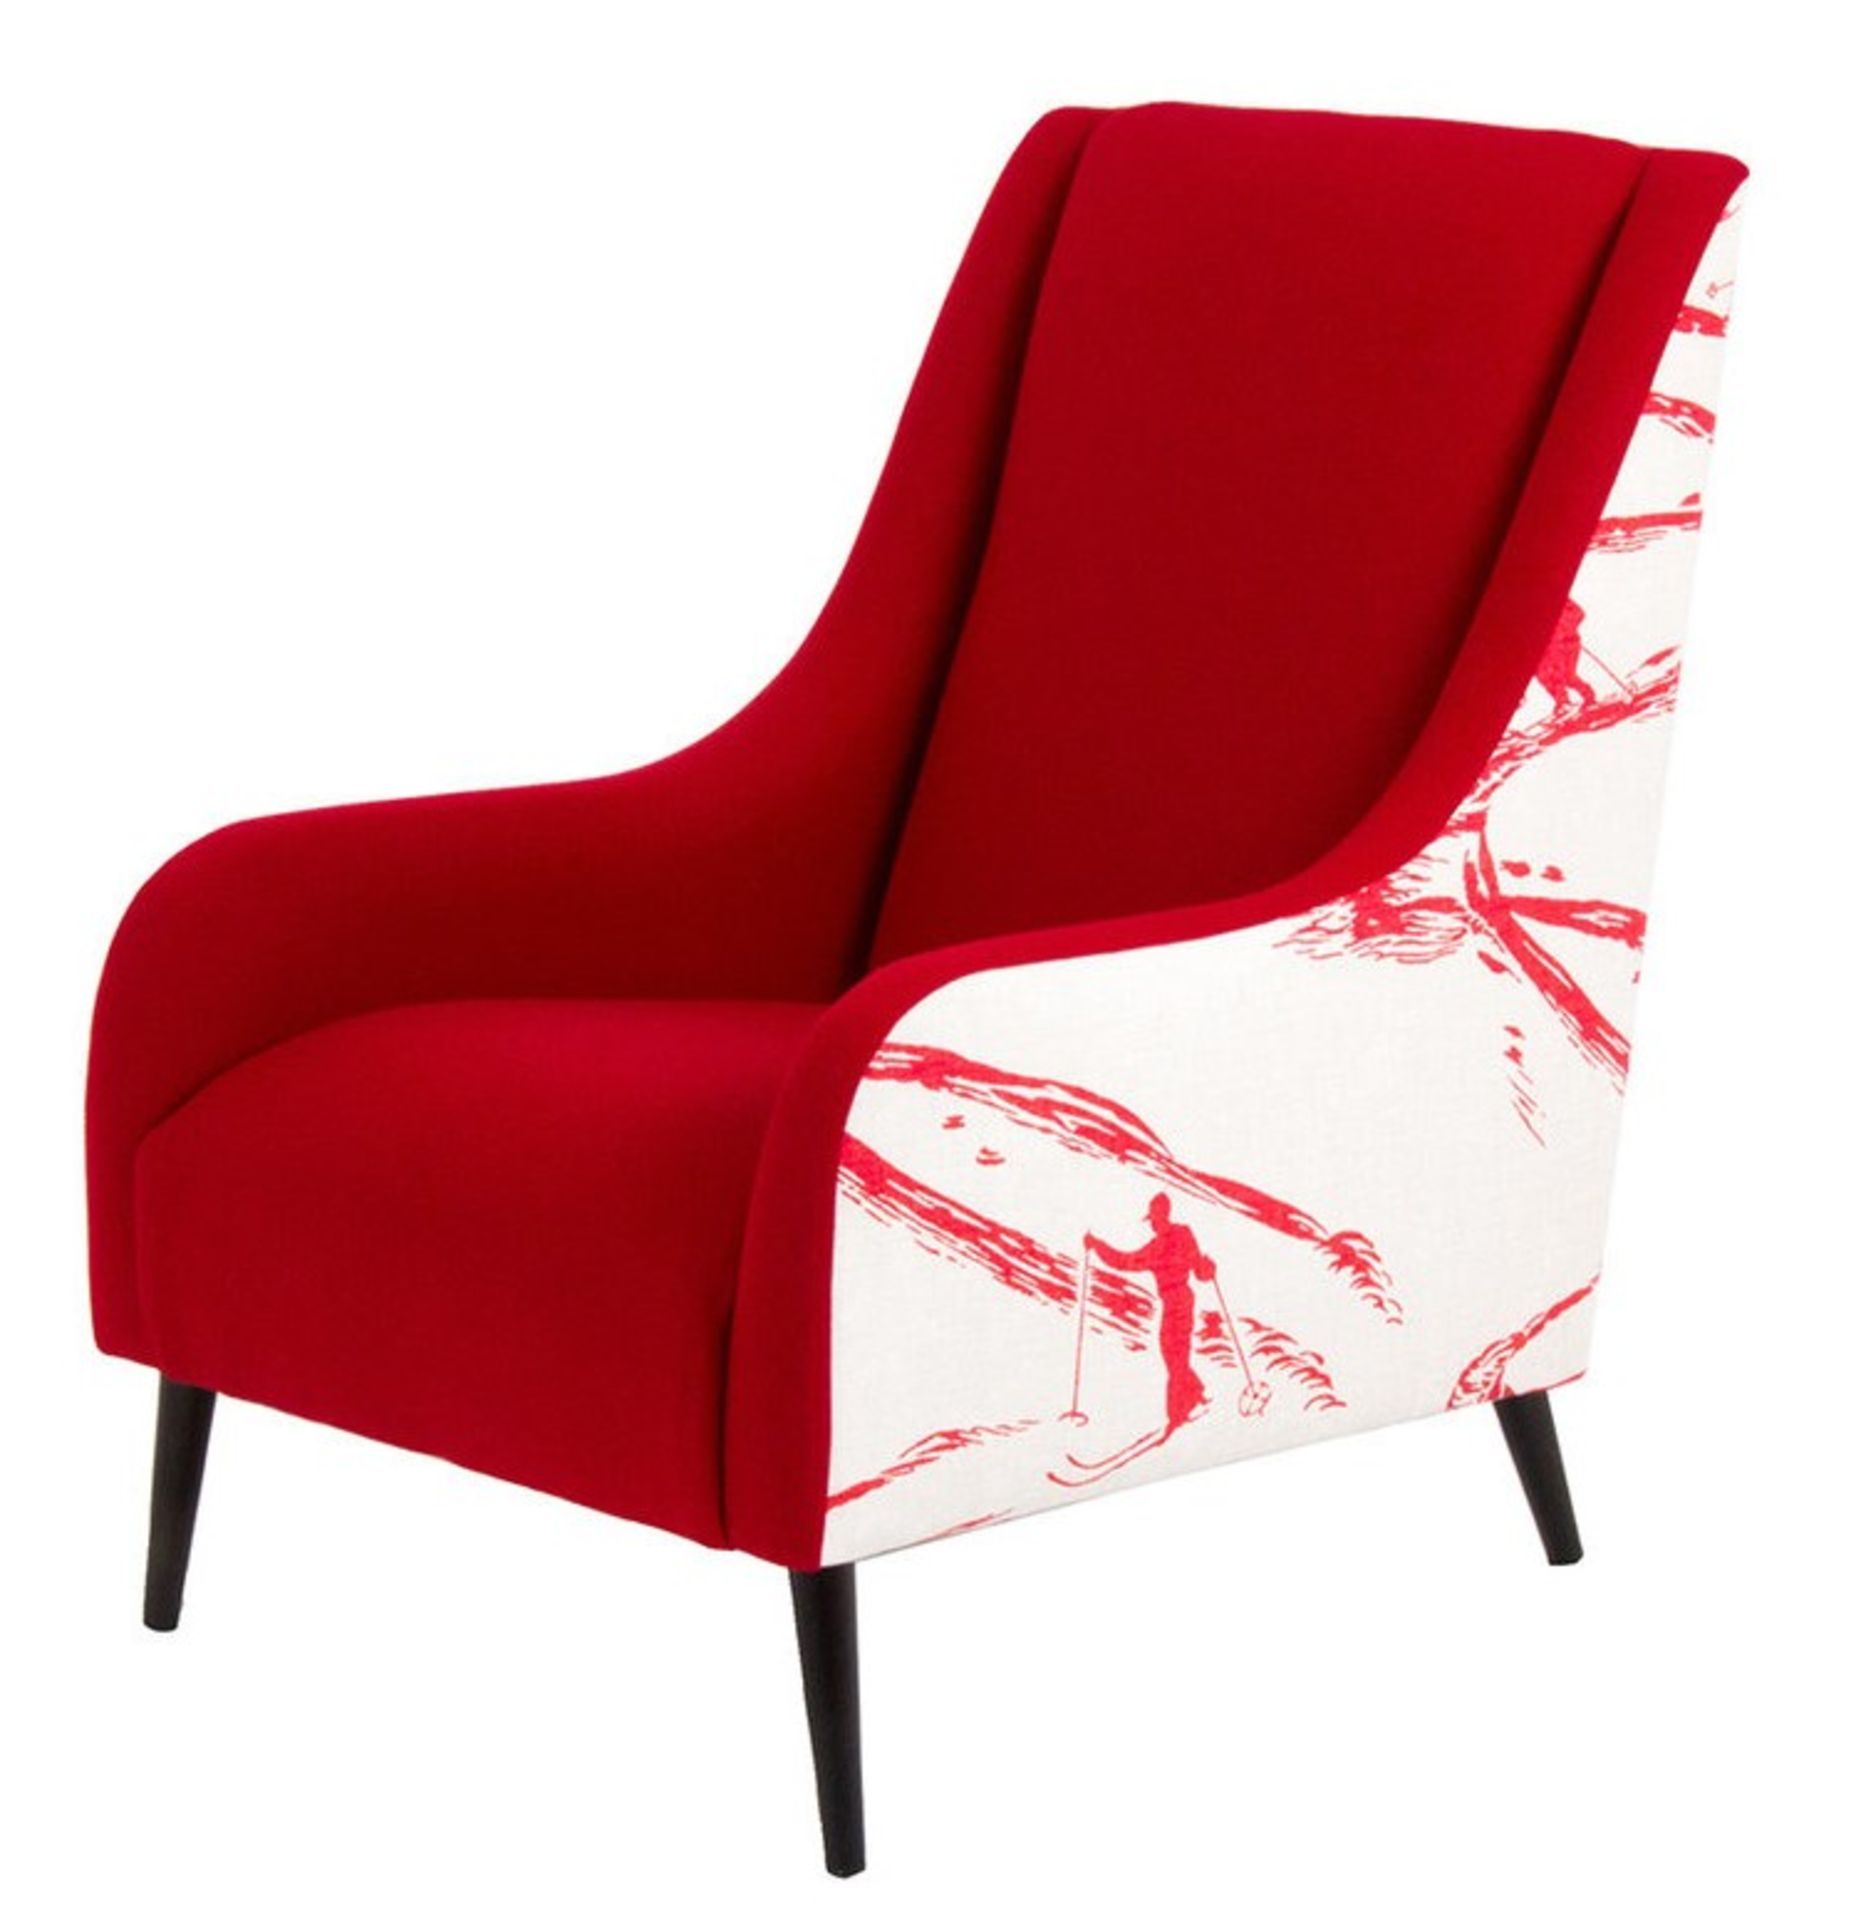 1 x Lauran Armchair Upholstered in Aviemore Skiing Fabric in Red and White - RRP £779! - Image 2 of 7